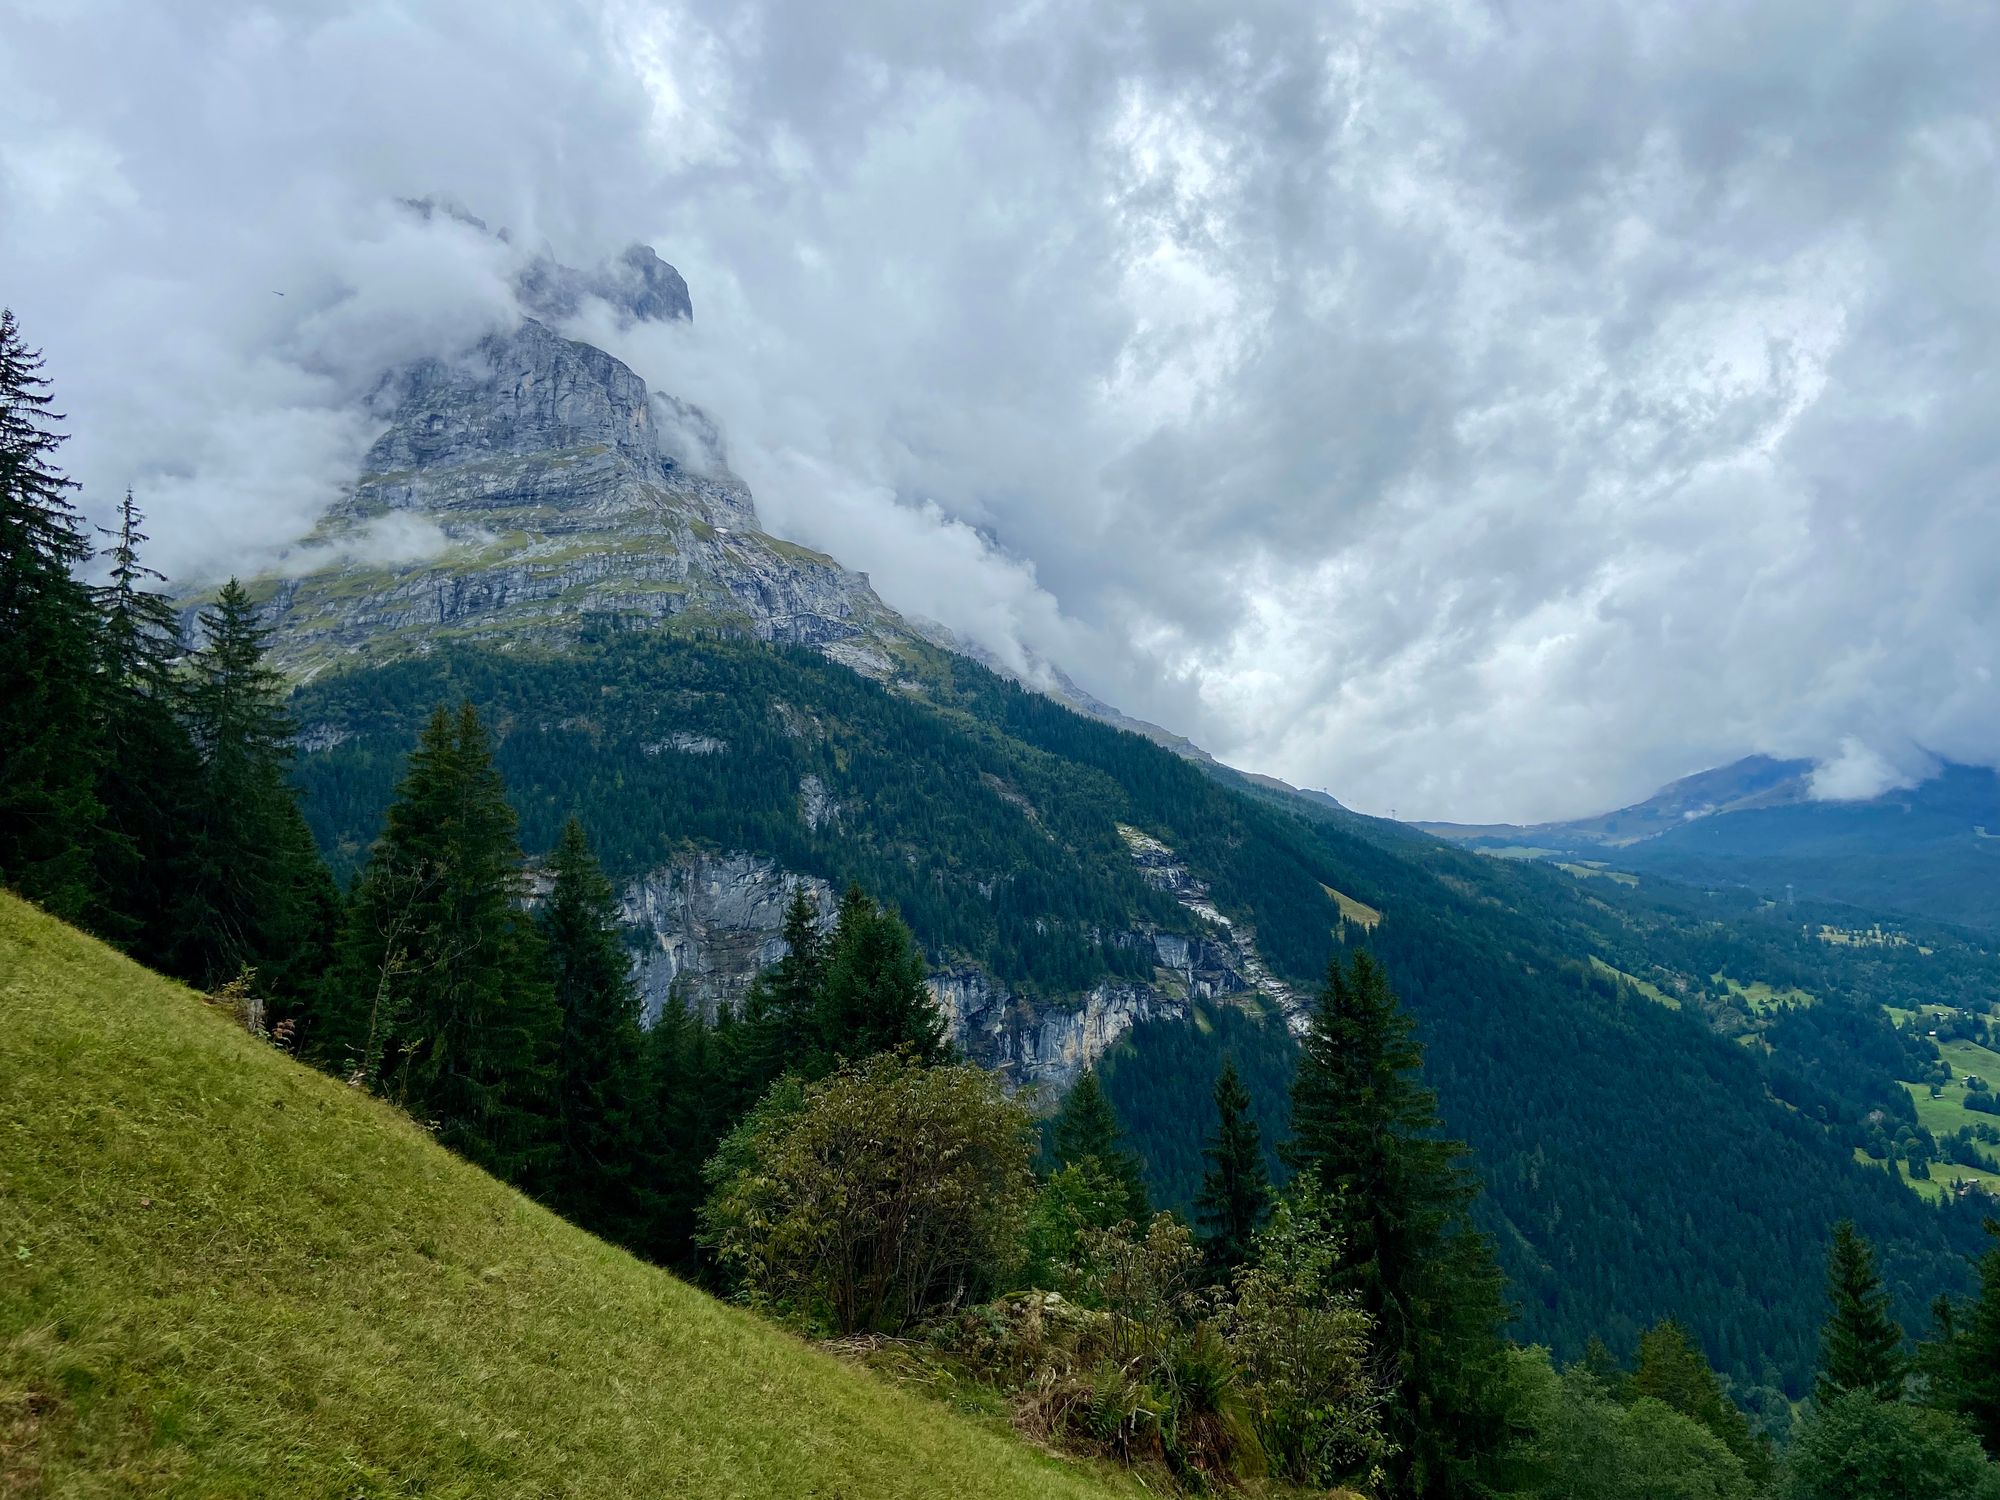 A steeply sloped grassy meadow with pine trees ahead. In the distance, a dramatic mountain peak surrounded by clouds.